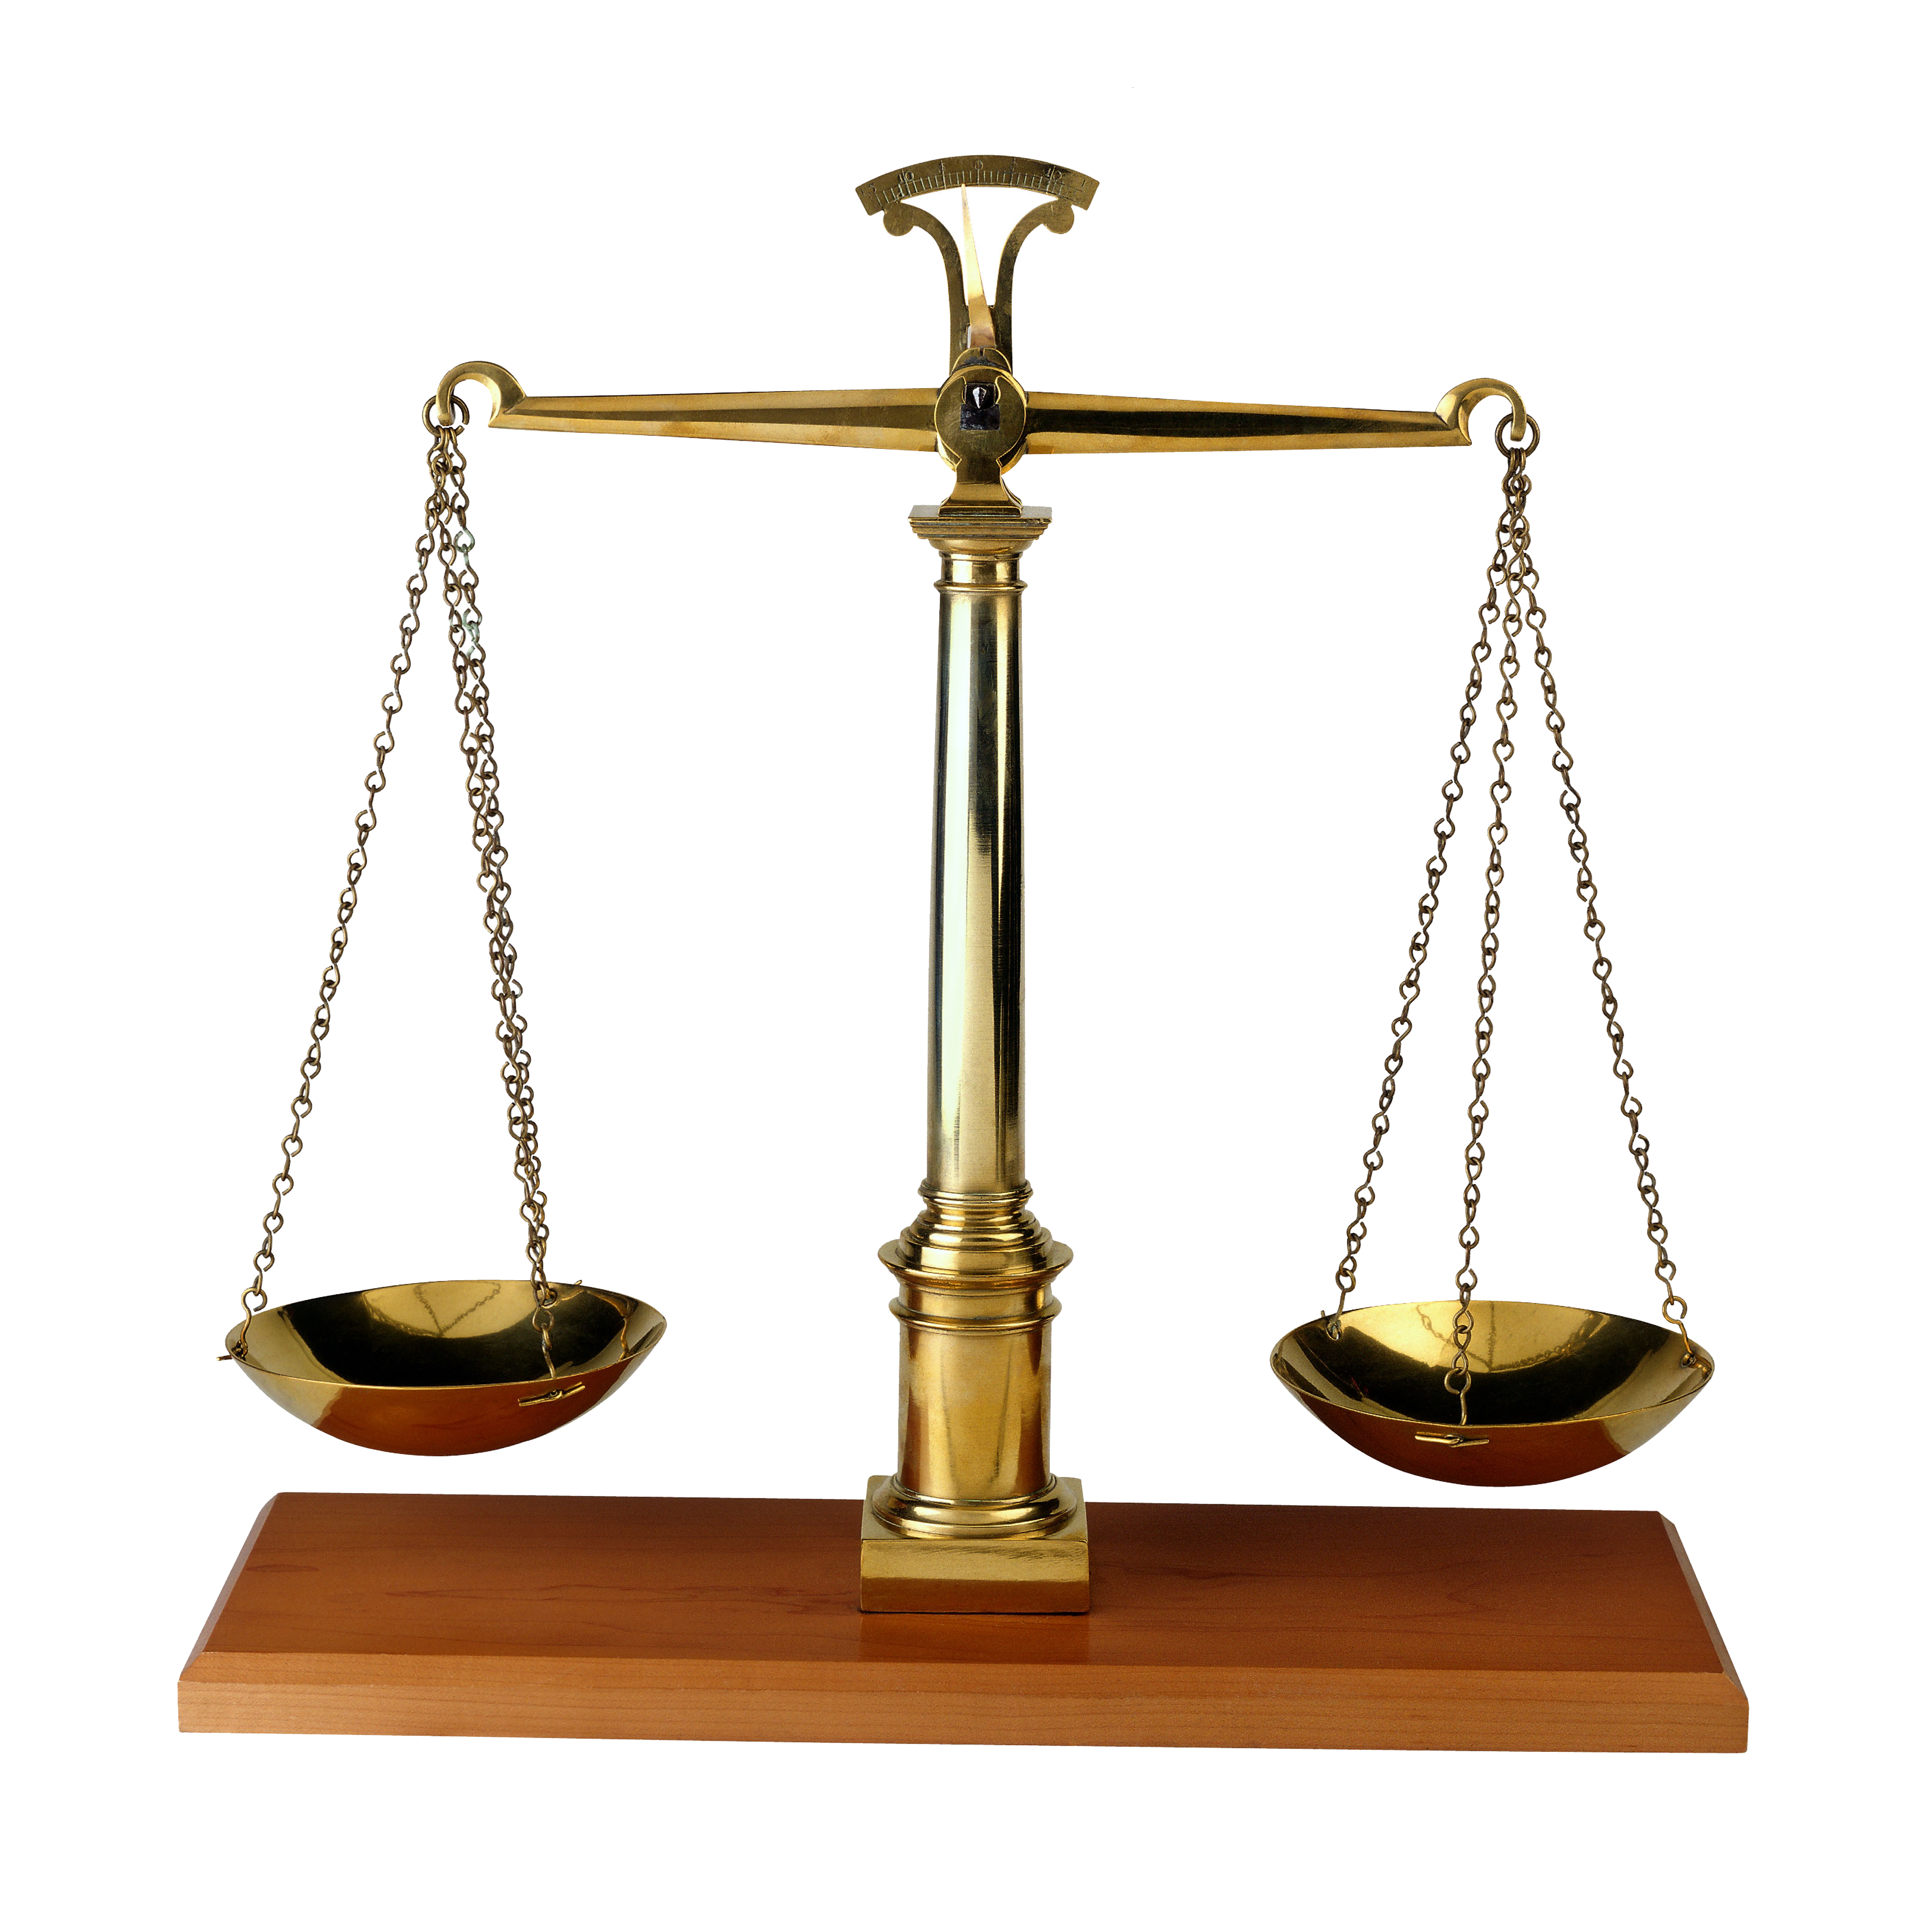 free clipart images scales of justice - photo #30